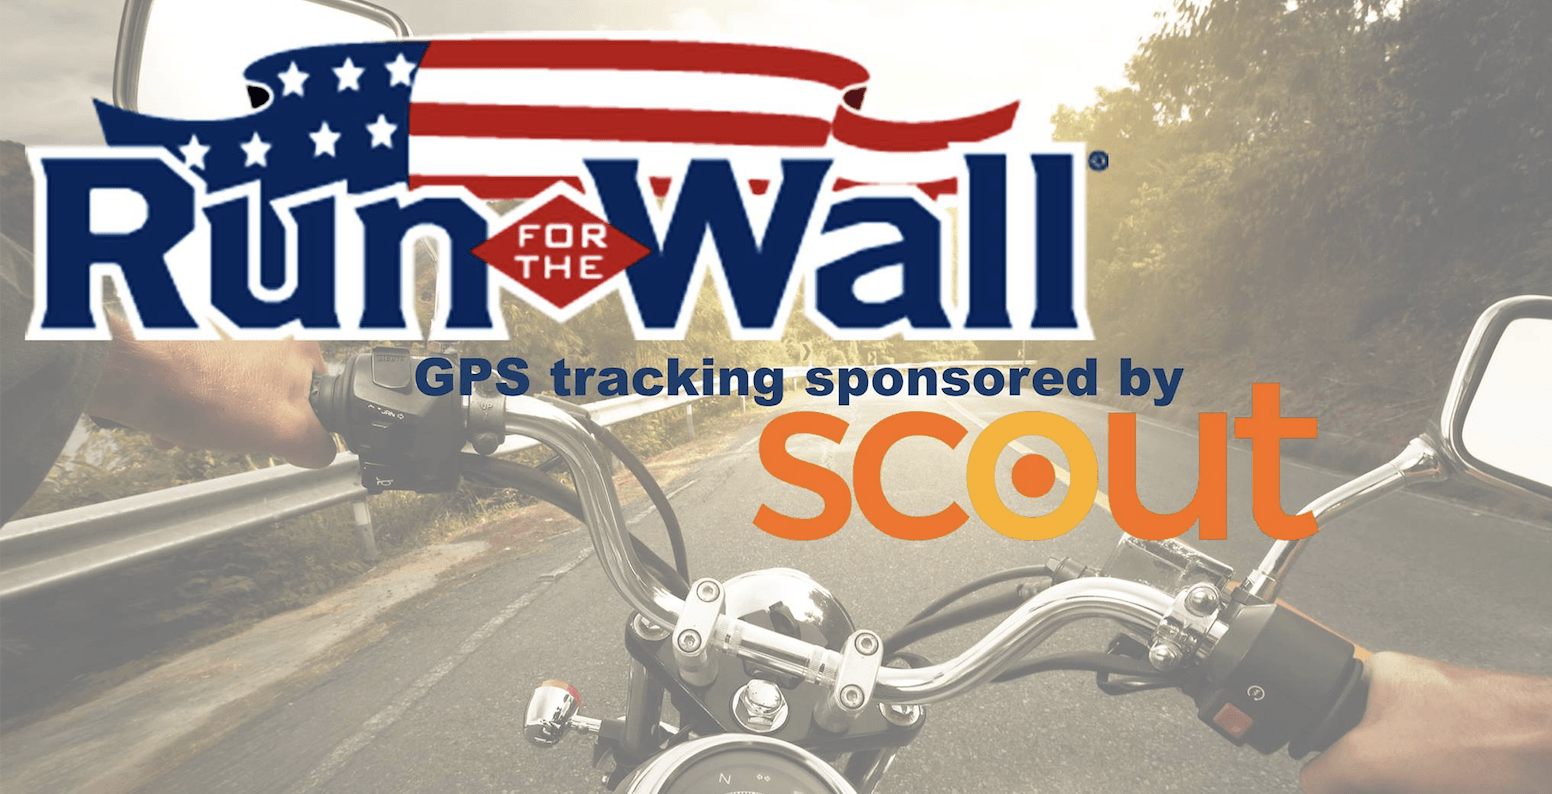 You are currently viewing VOS Sponsors Tracking For “Run For The Wall”